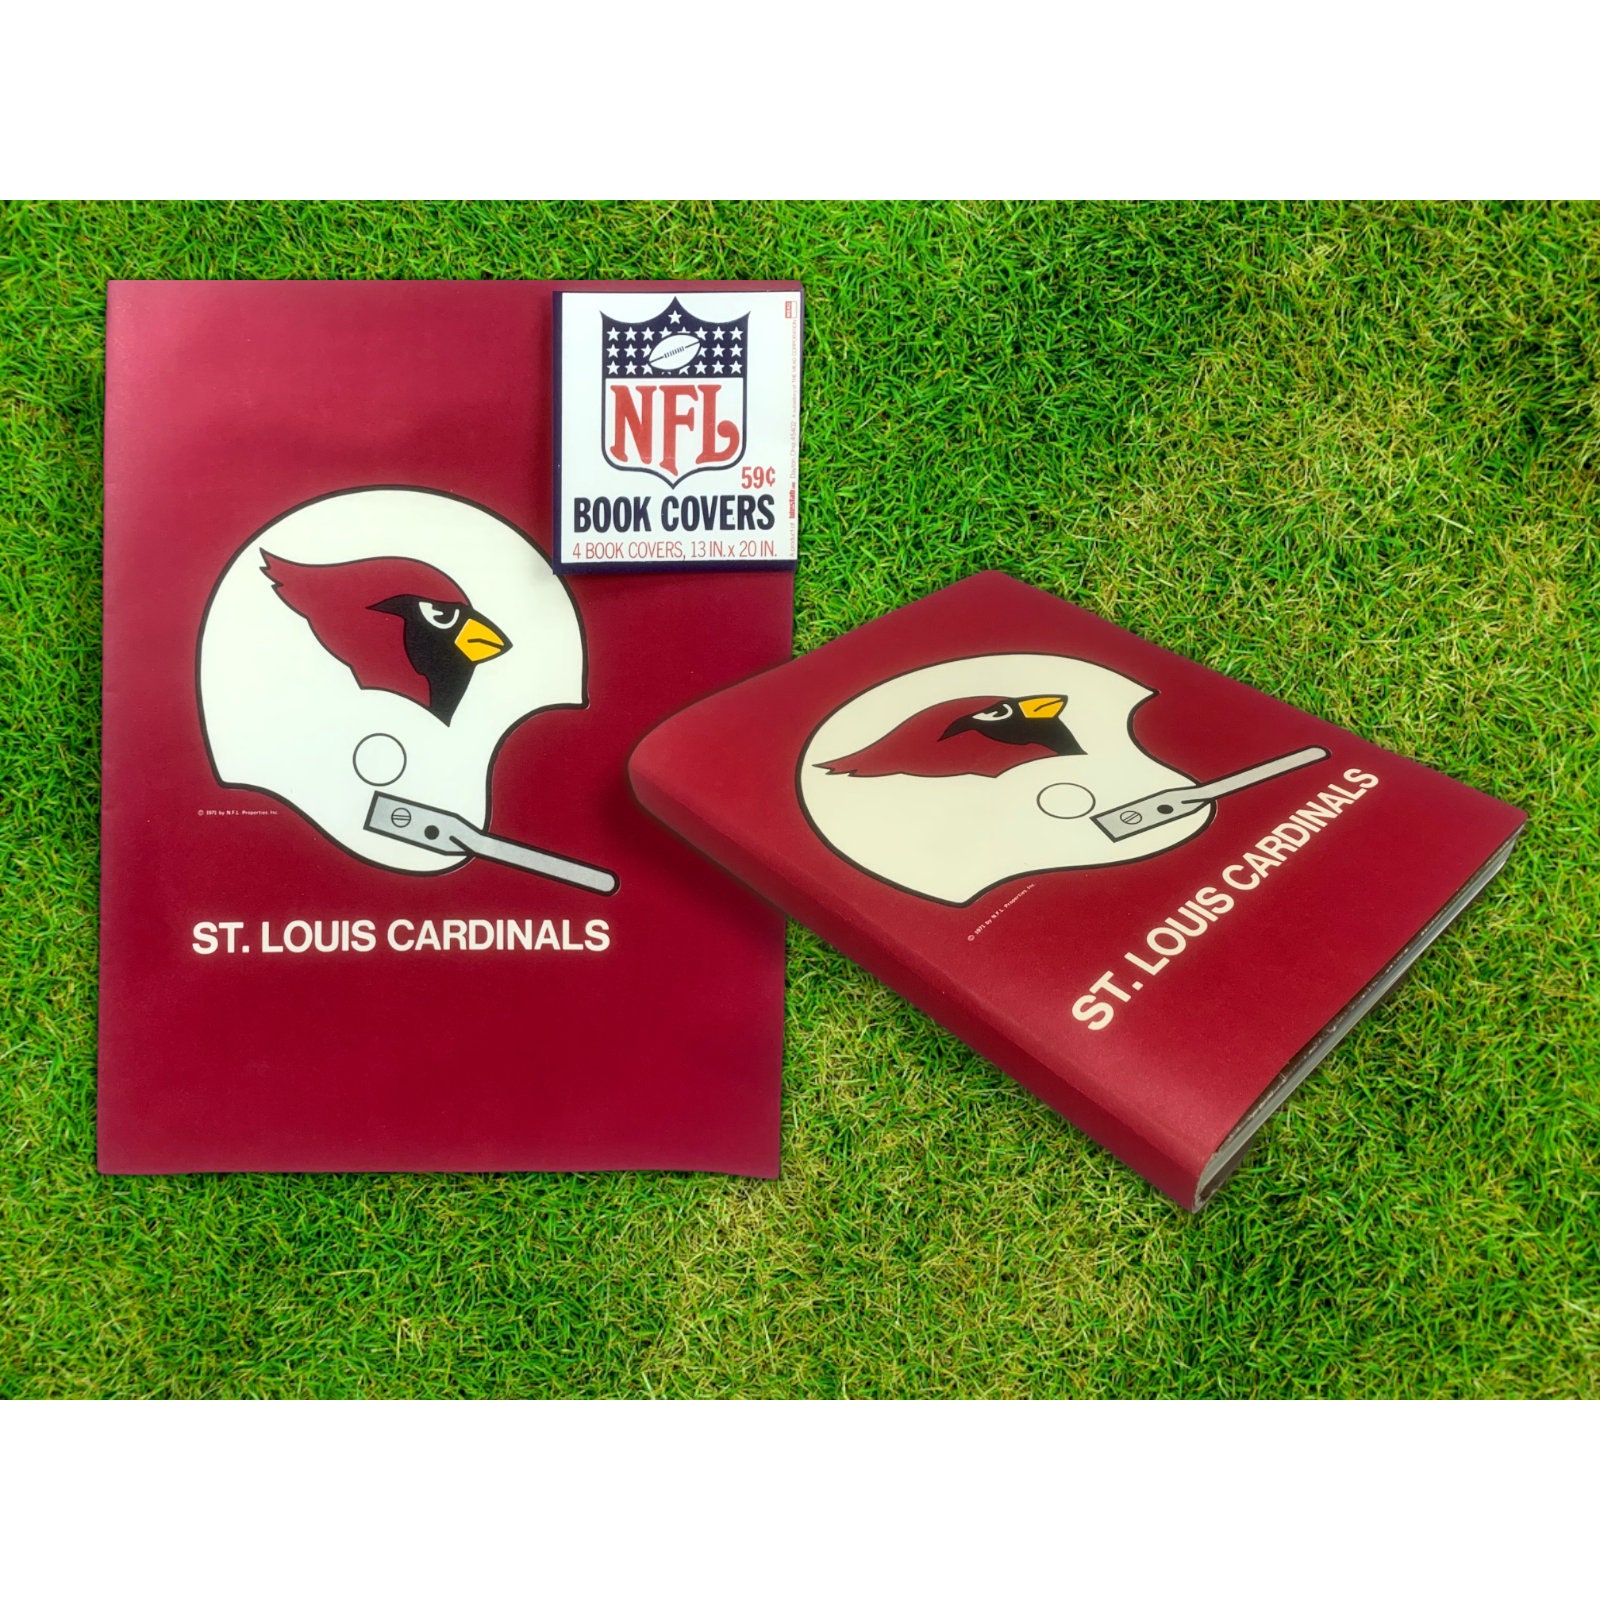 St. Louis Football Cardinals 1970s Vintage NFL Book Cover 